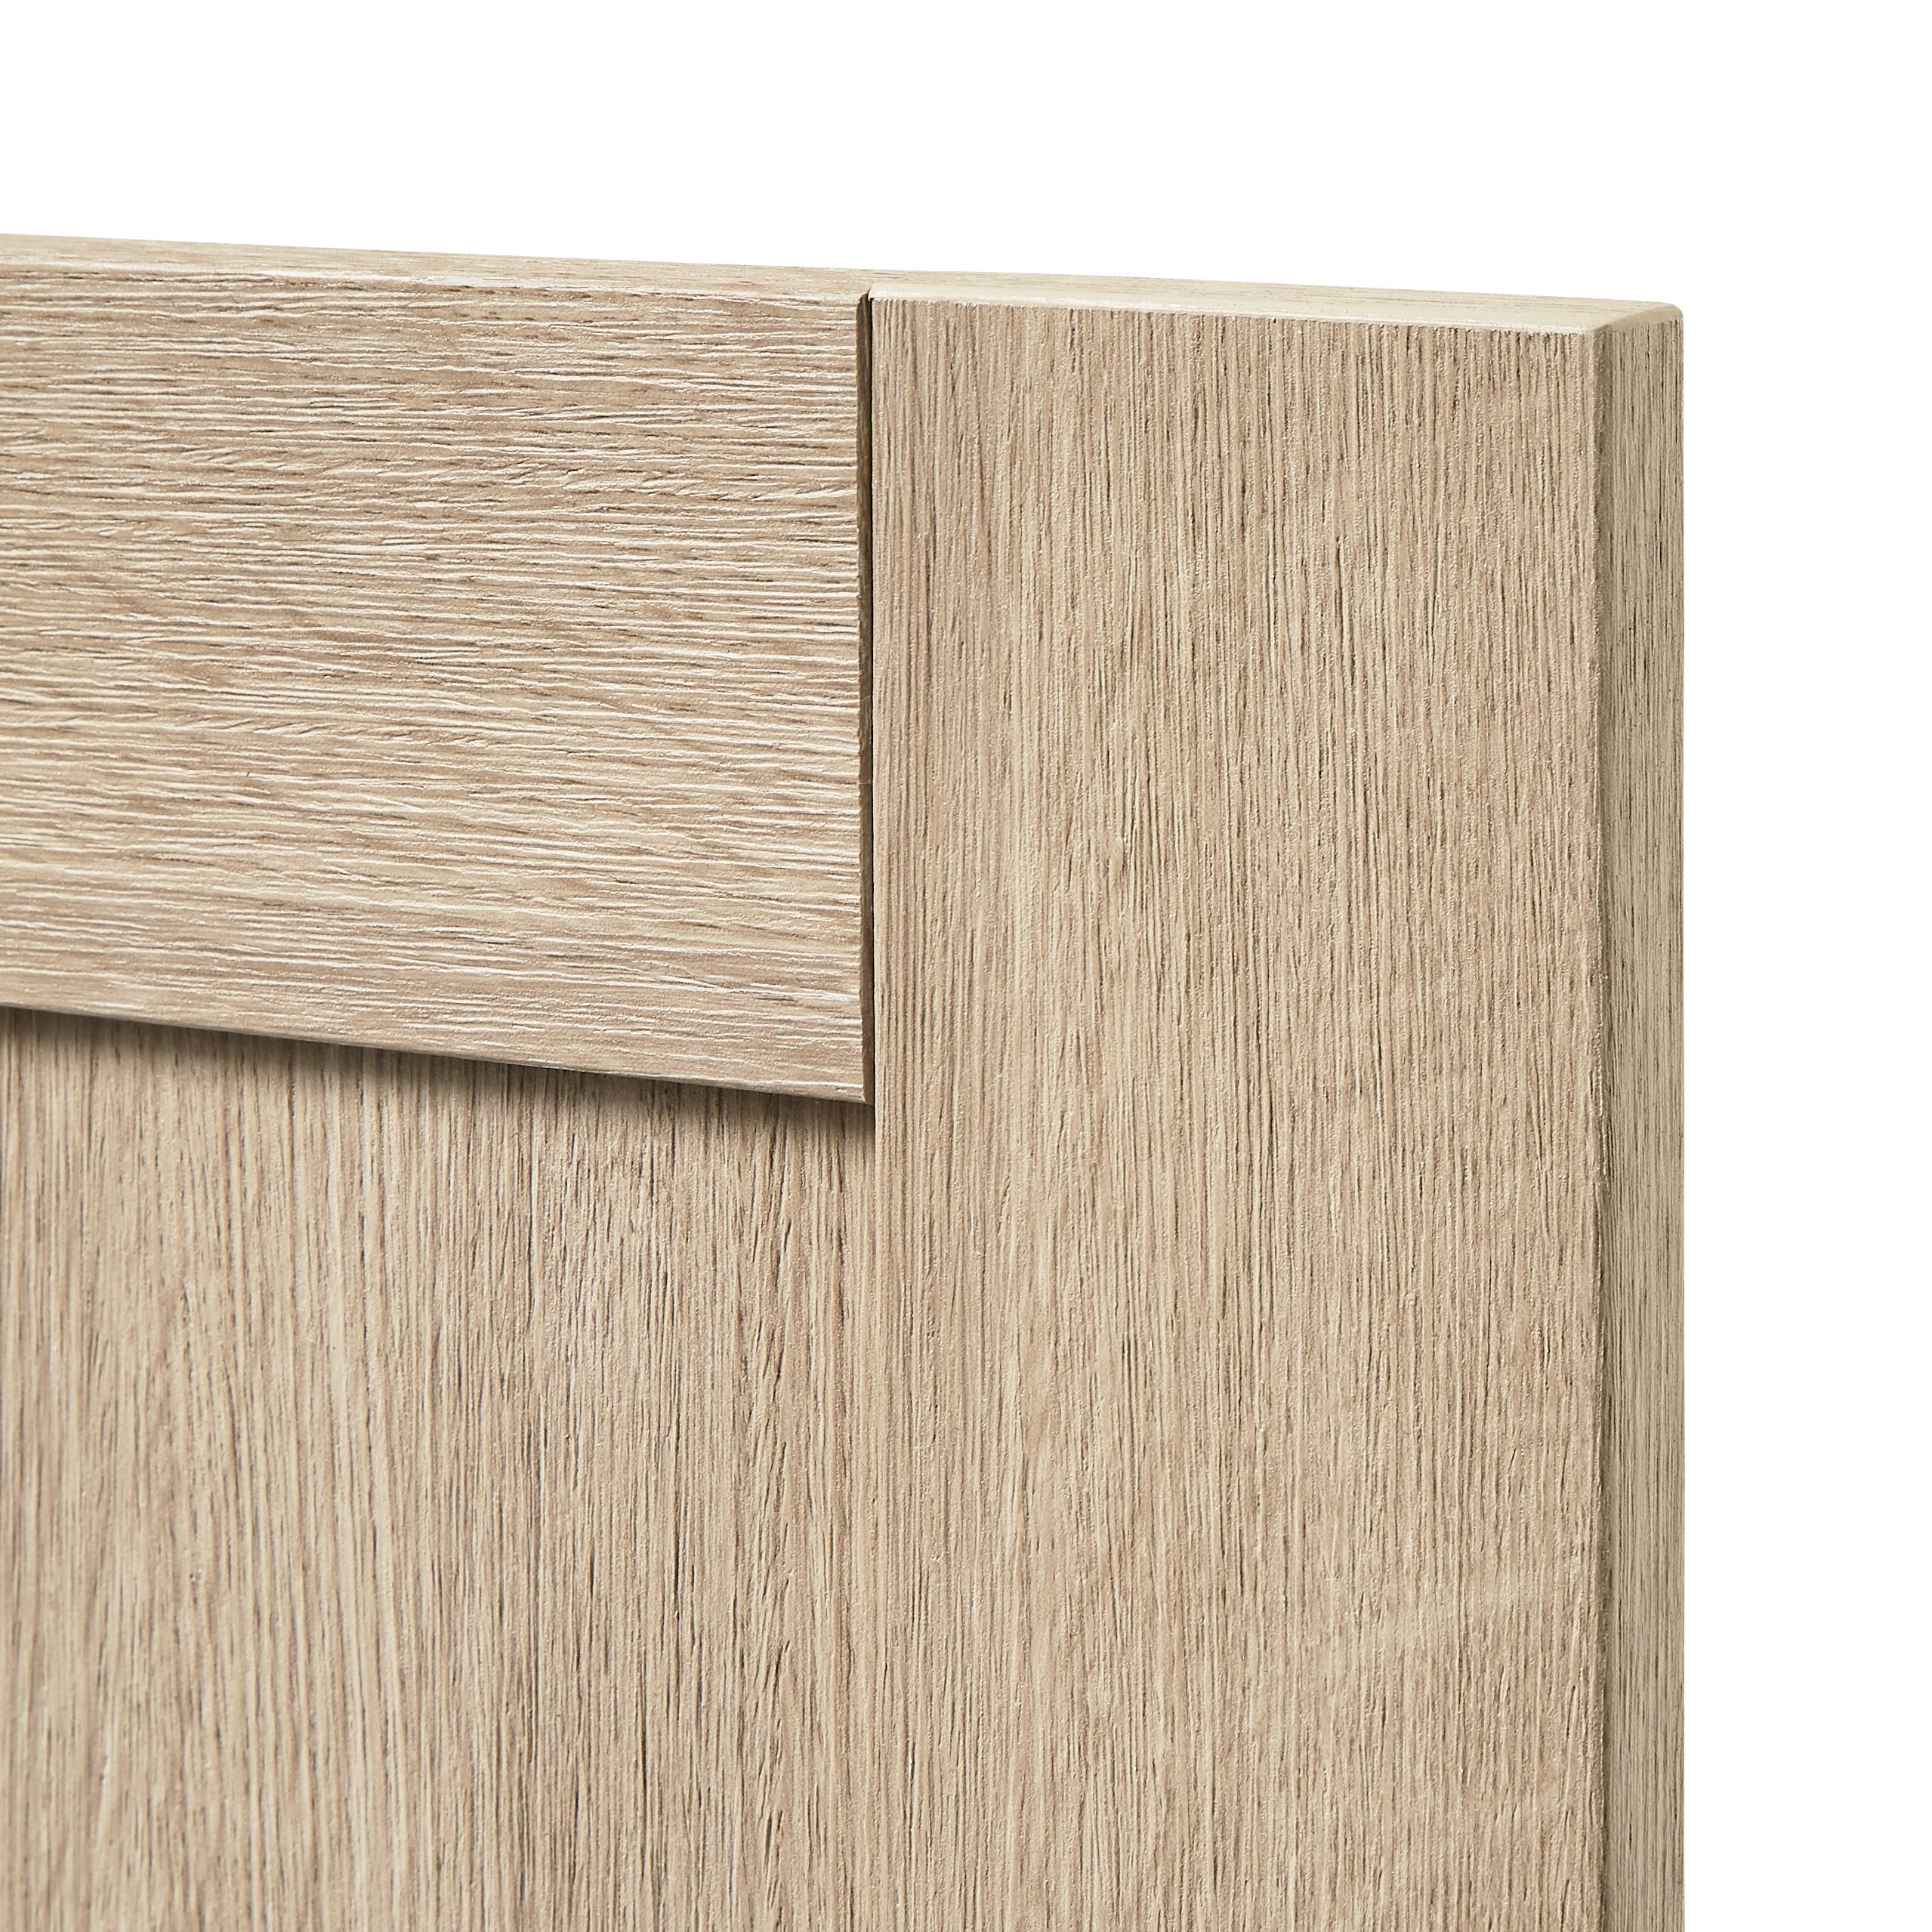 GoodHome Alpinia Oak effect shaker Drawer front (W)800mm, Pack of 3